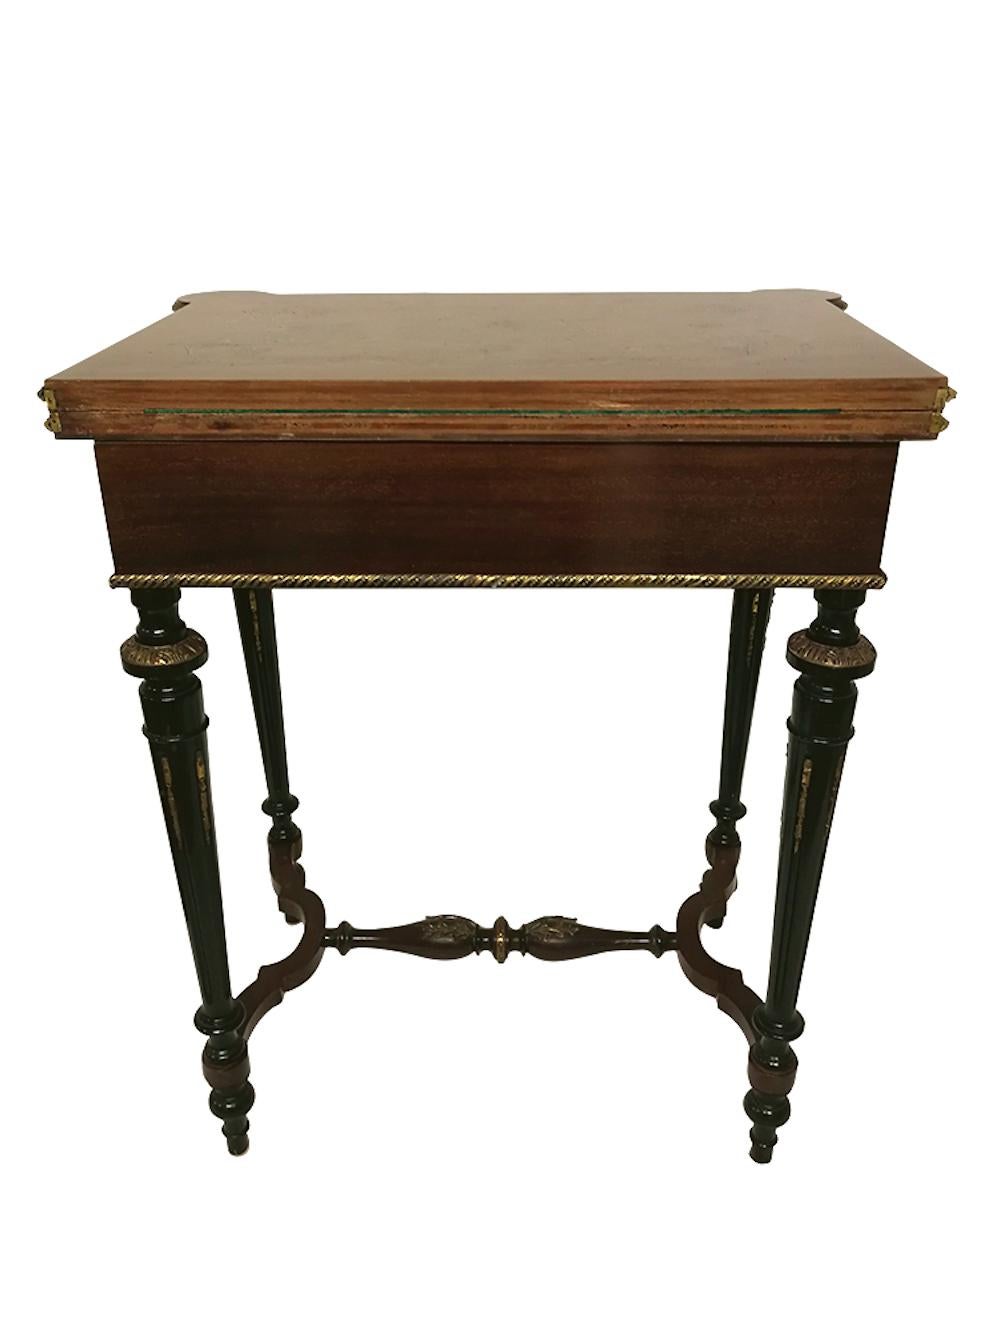 French Napoléon III Console Marquetery Game Table, 19th Century For Sale